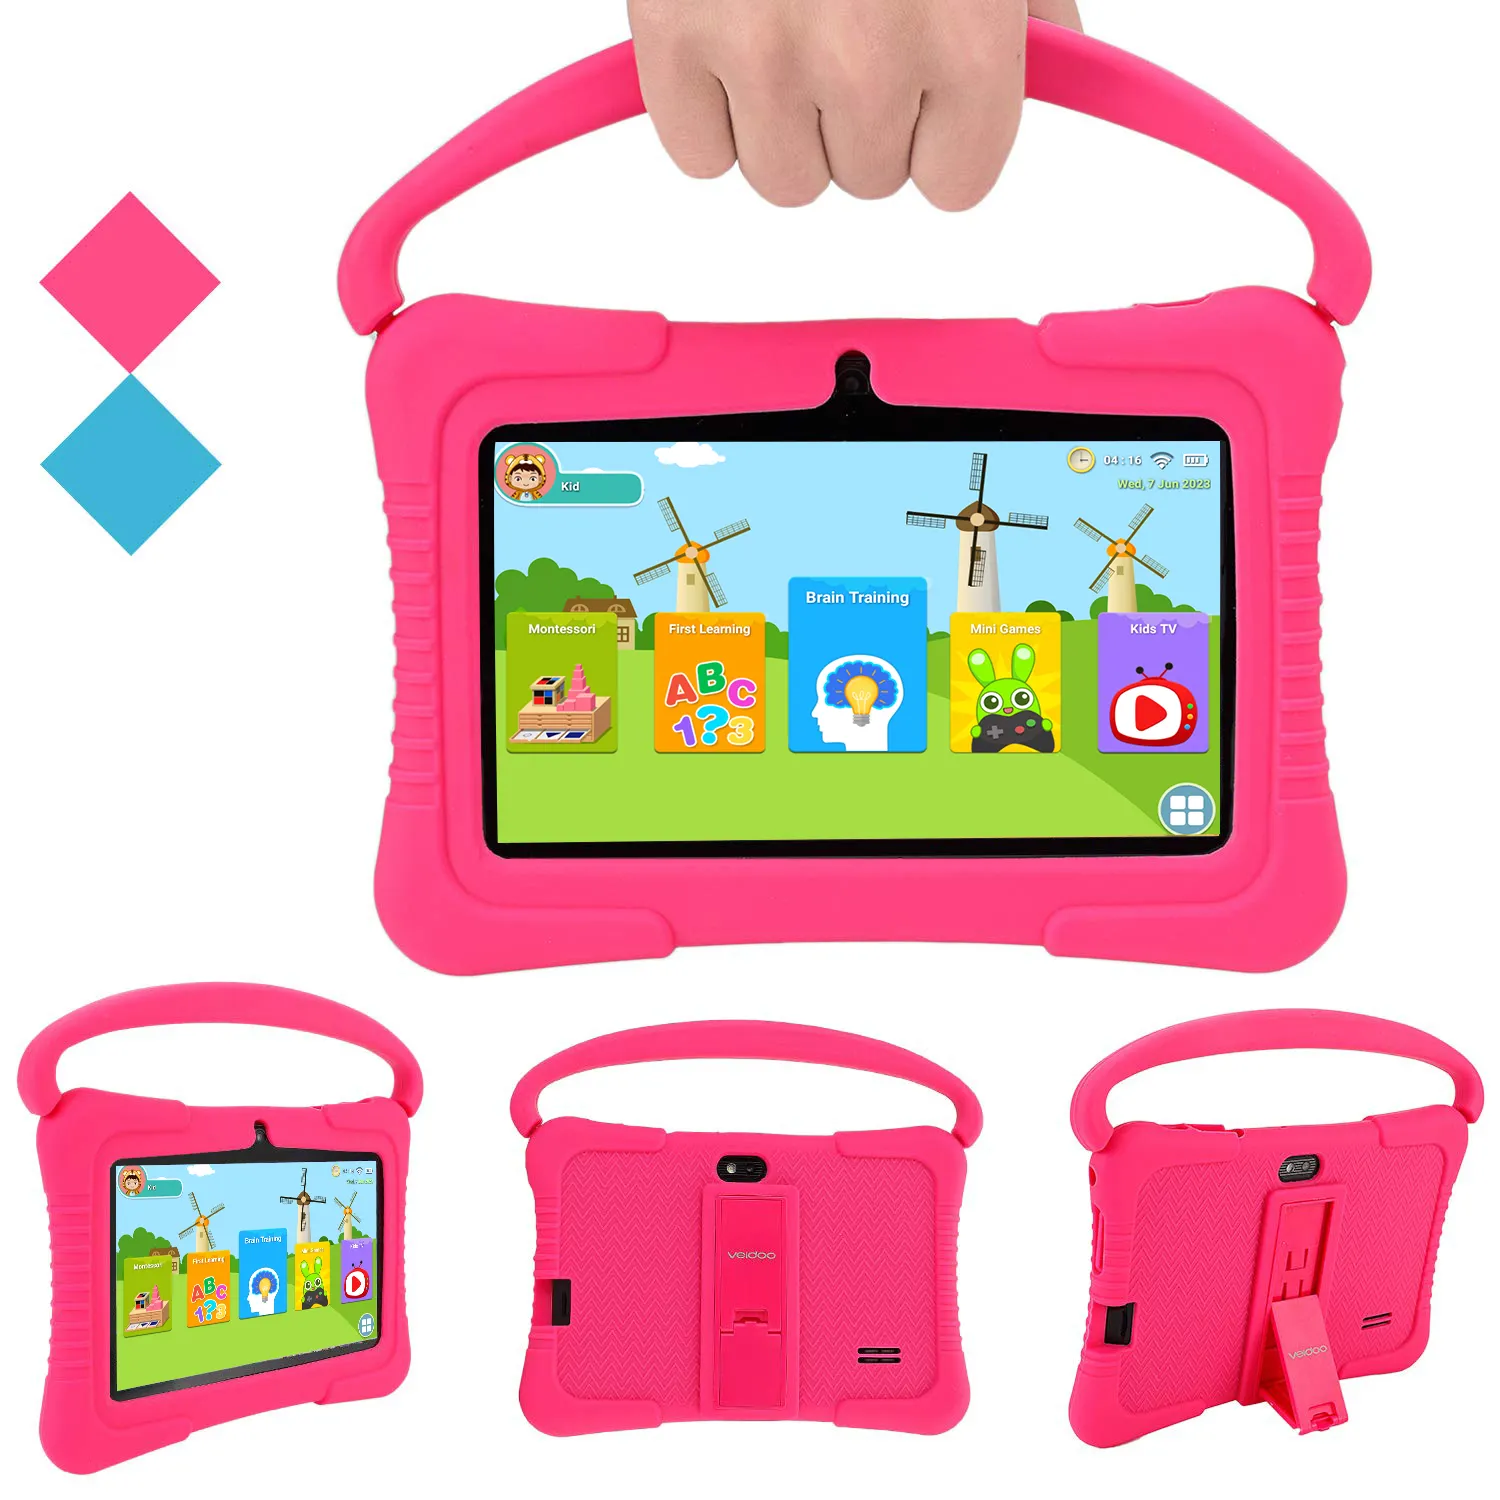 Schiefen Wifi 7 Zoll Android Tablet Pc Educational Kinder Tablet Mit Silikon Fall